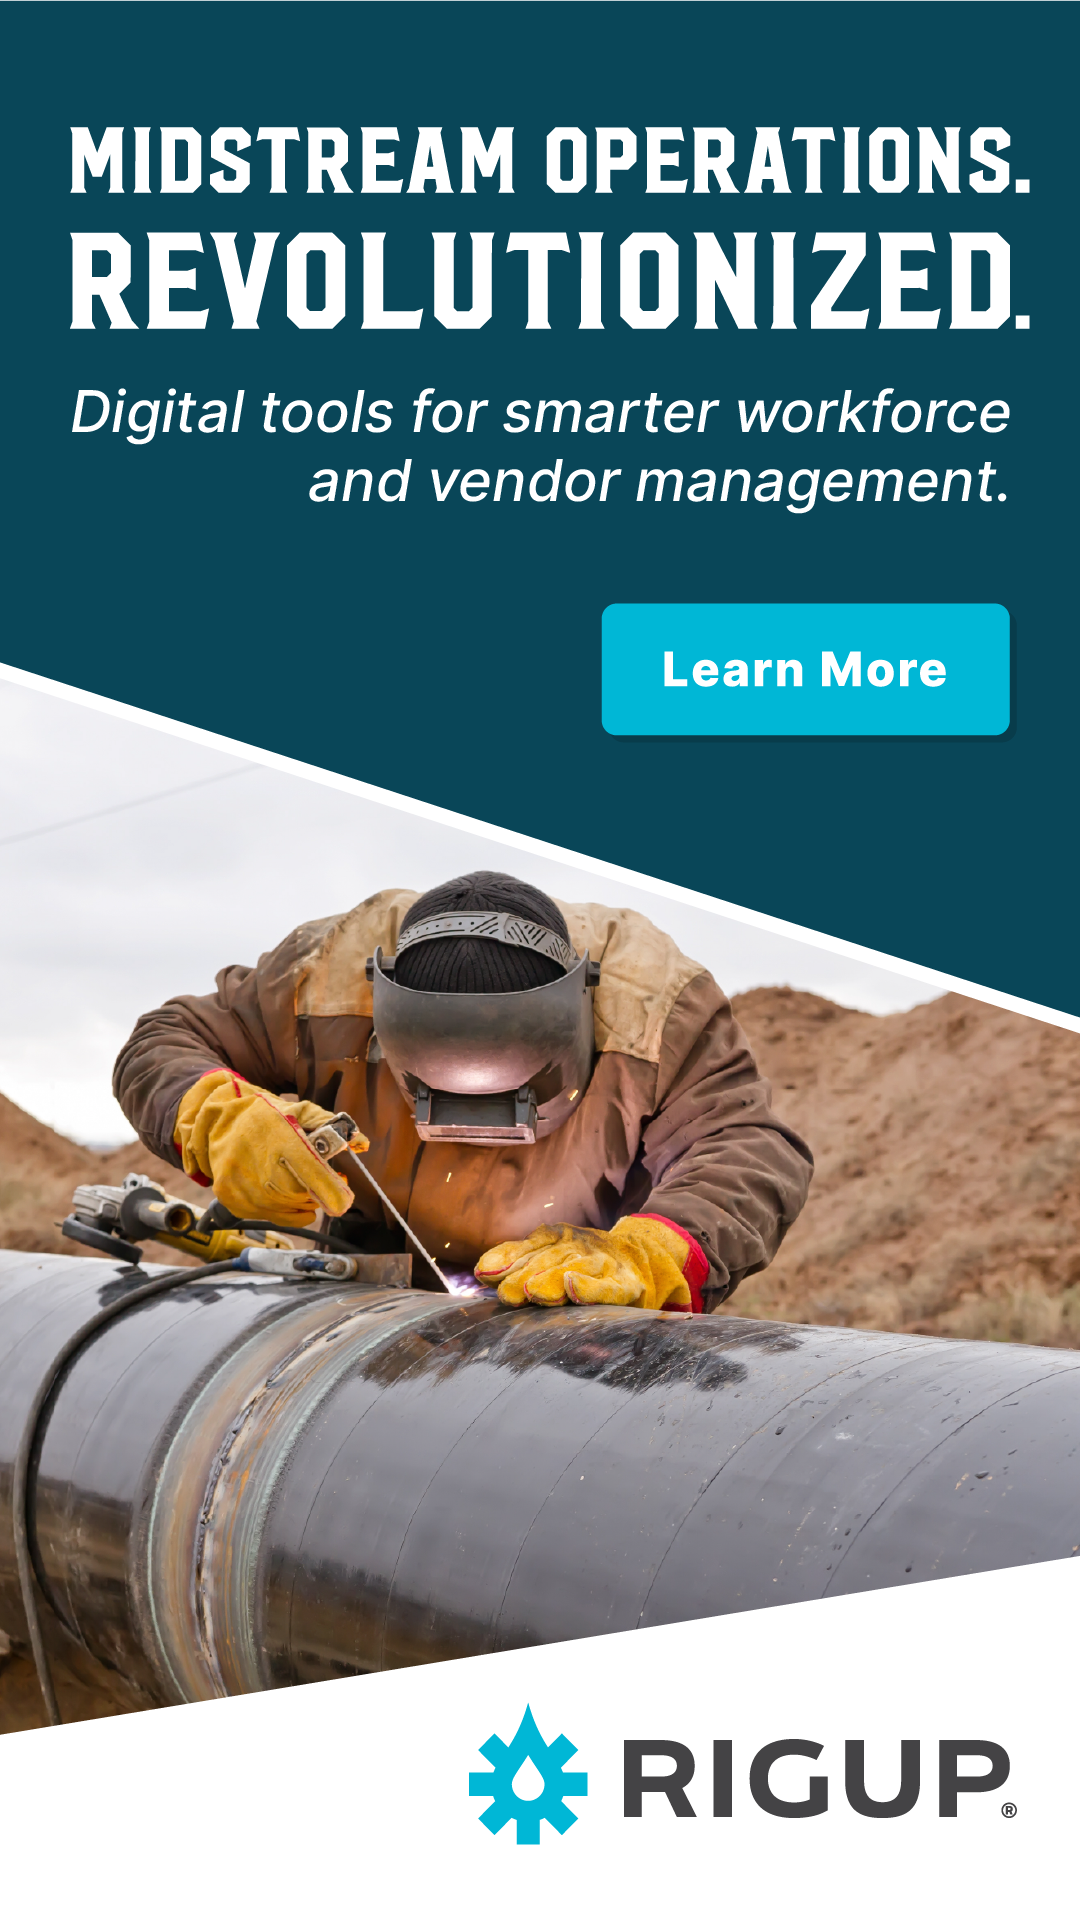 Midstream Oil & Gas display ad for RigUp